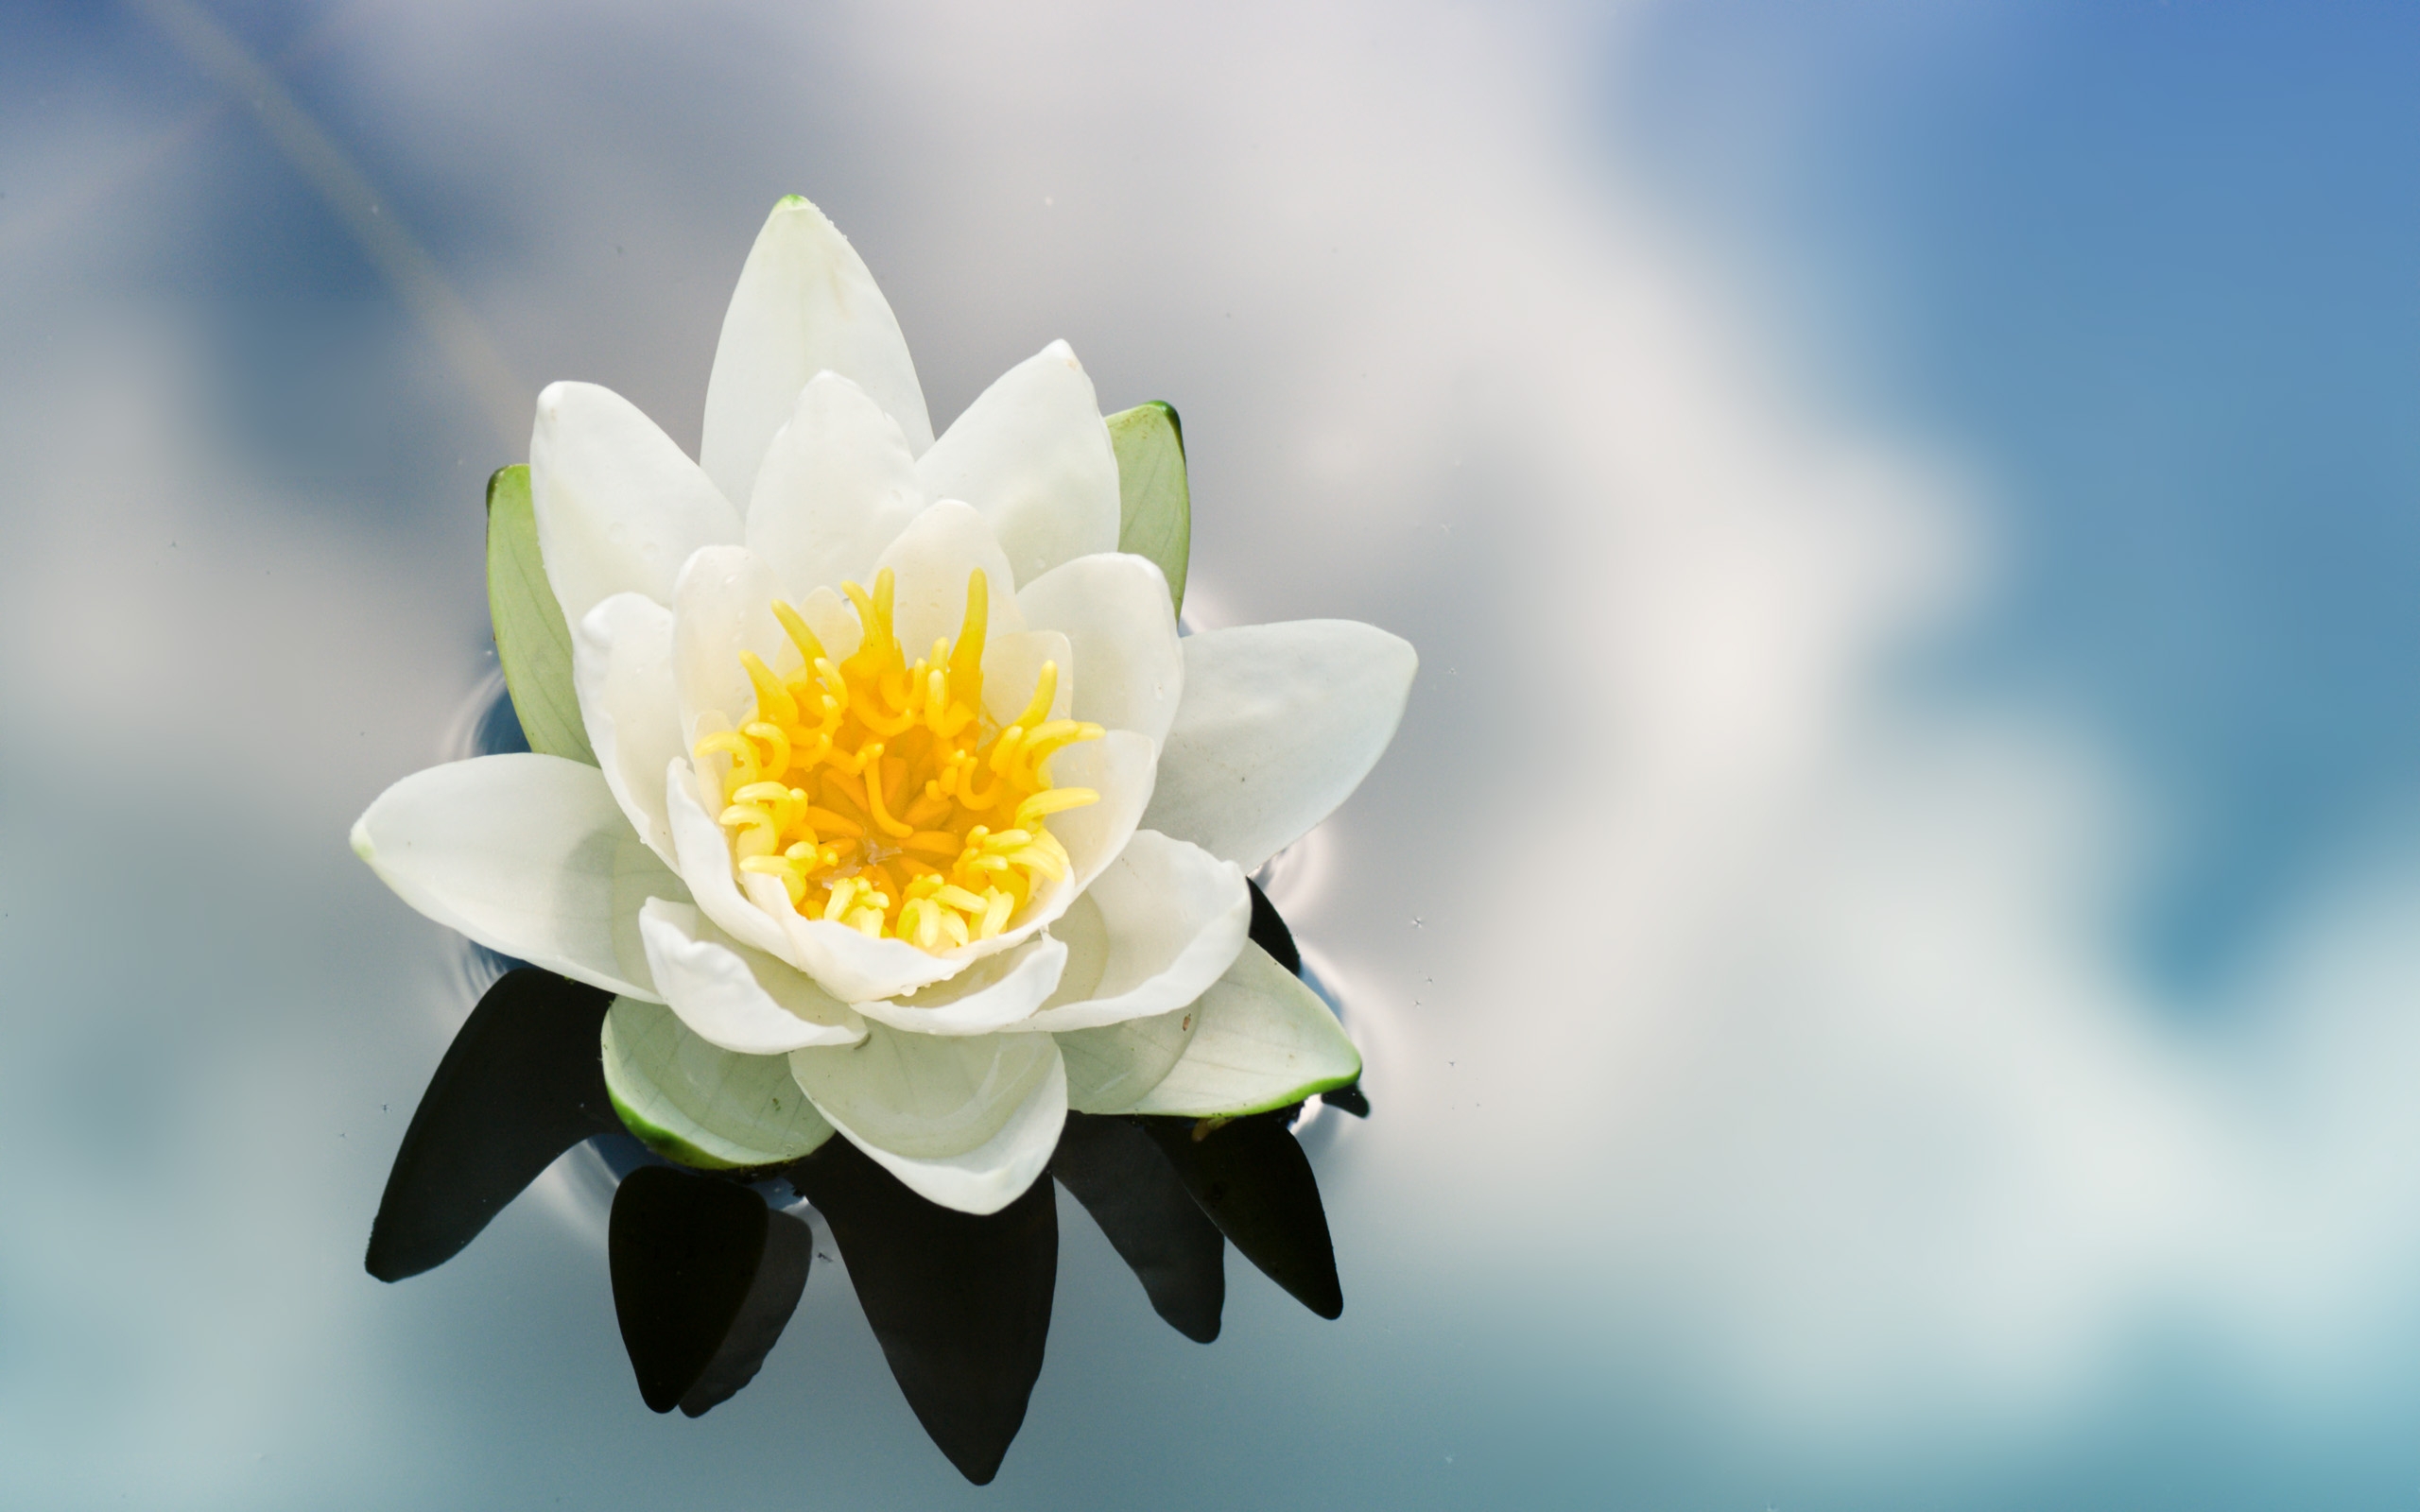 Earth Water Lily 2560x1600